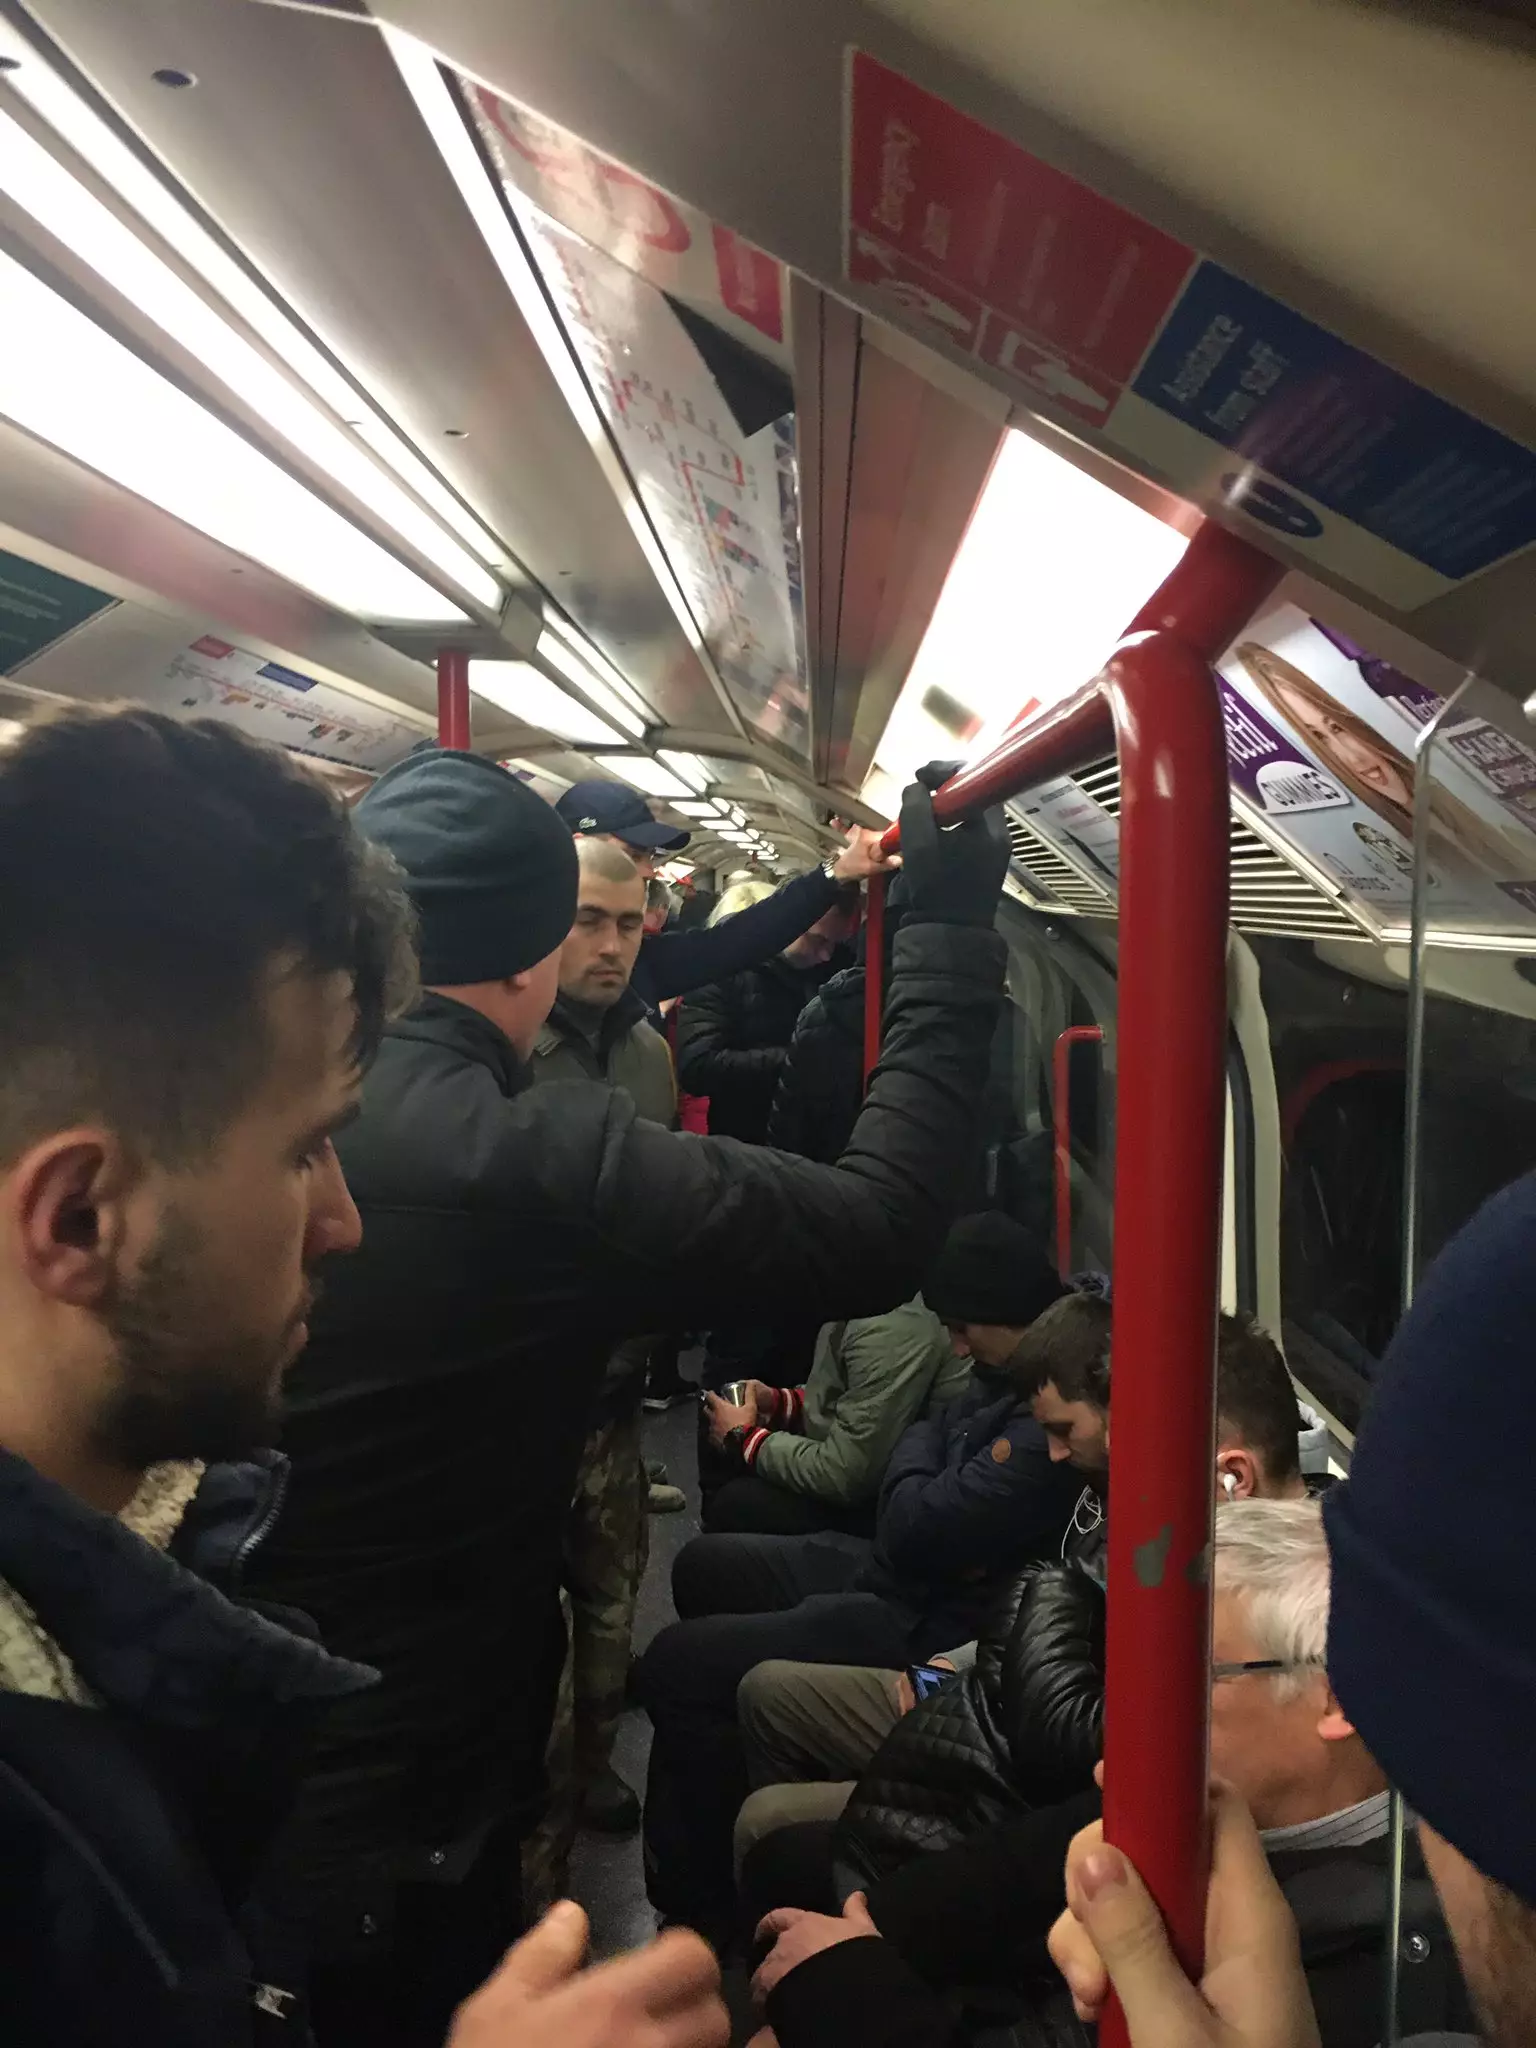 Train companies and the government have been criticised for the packed carriages.